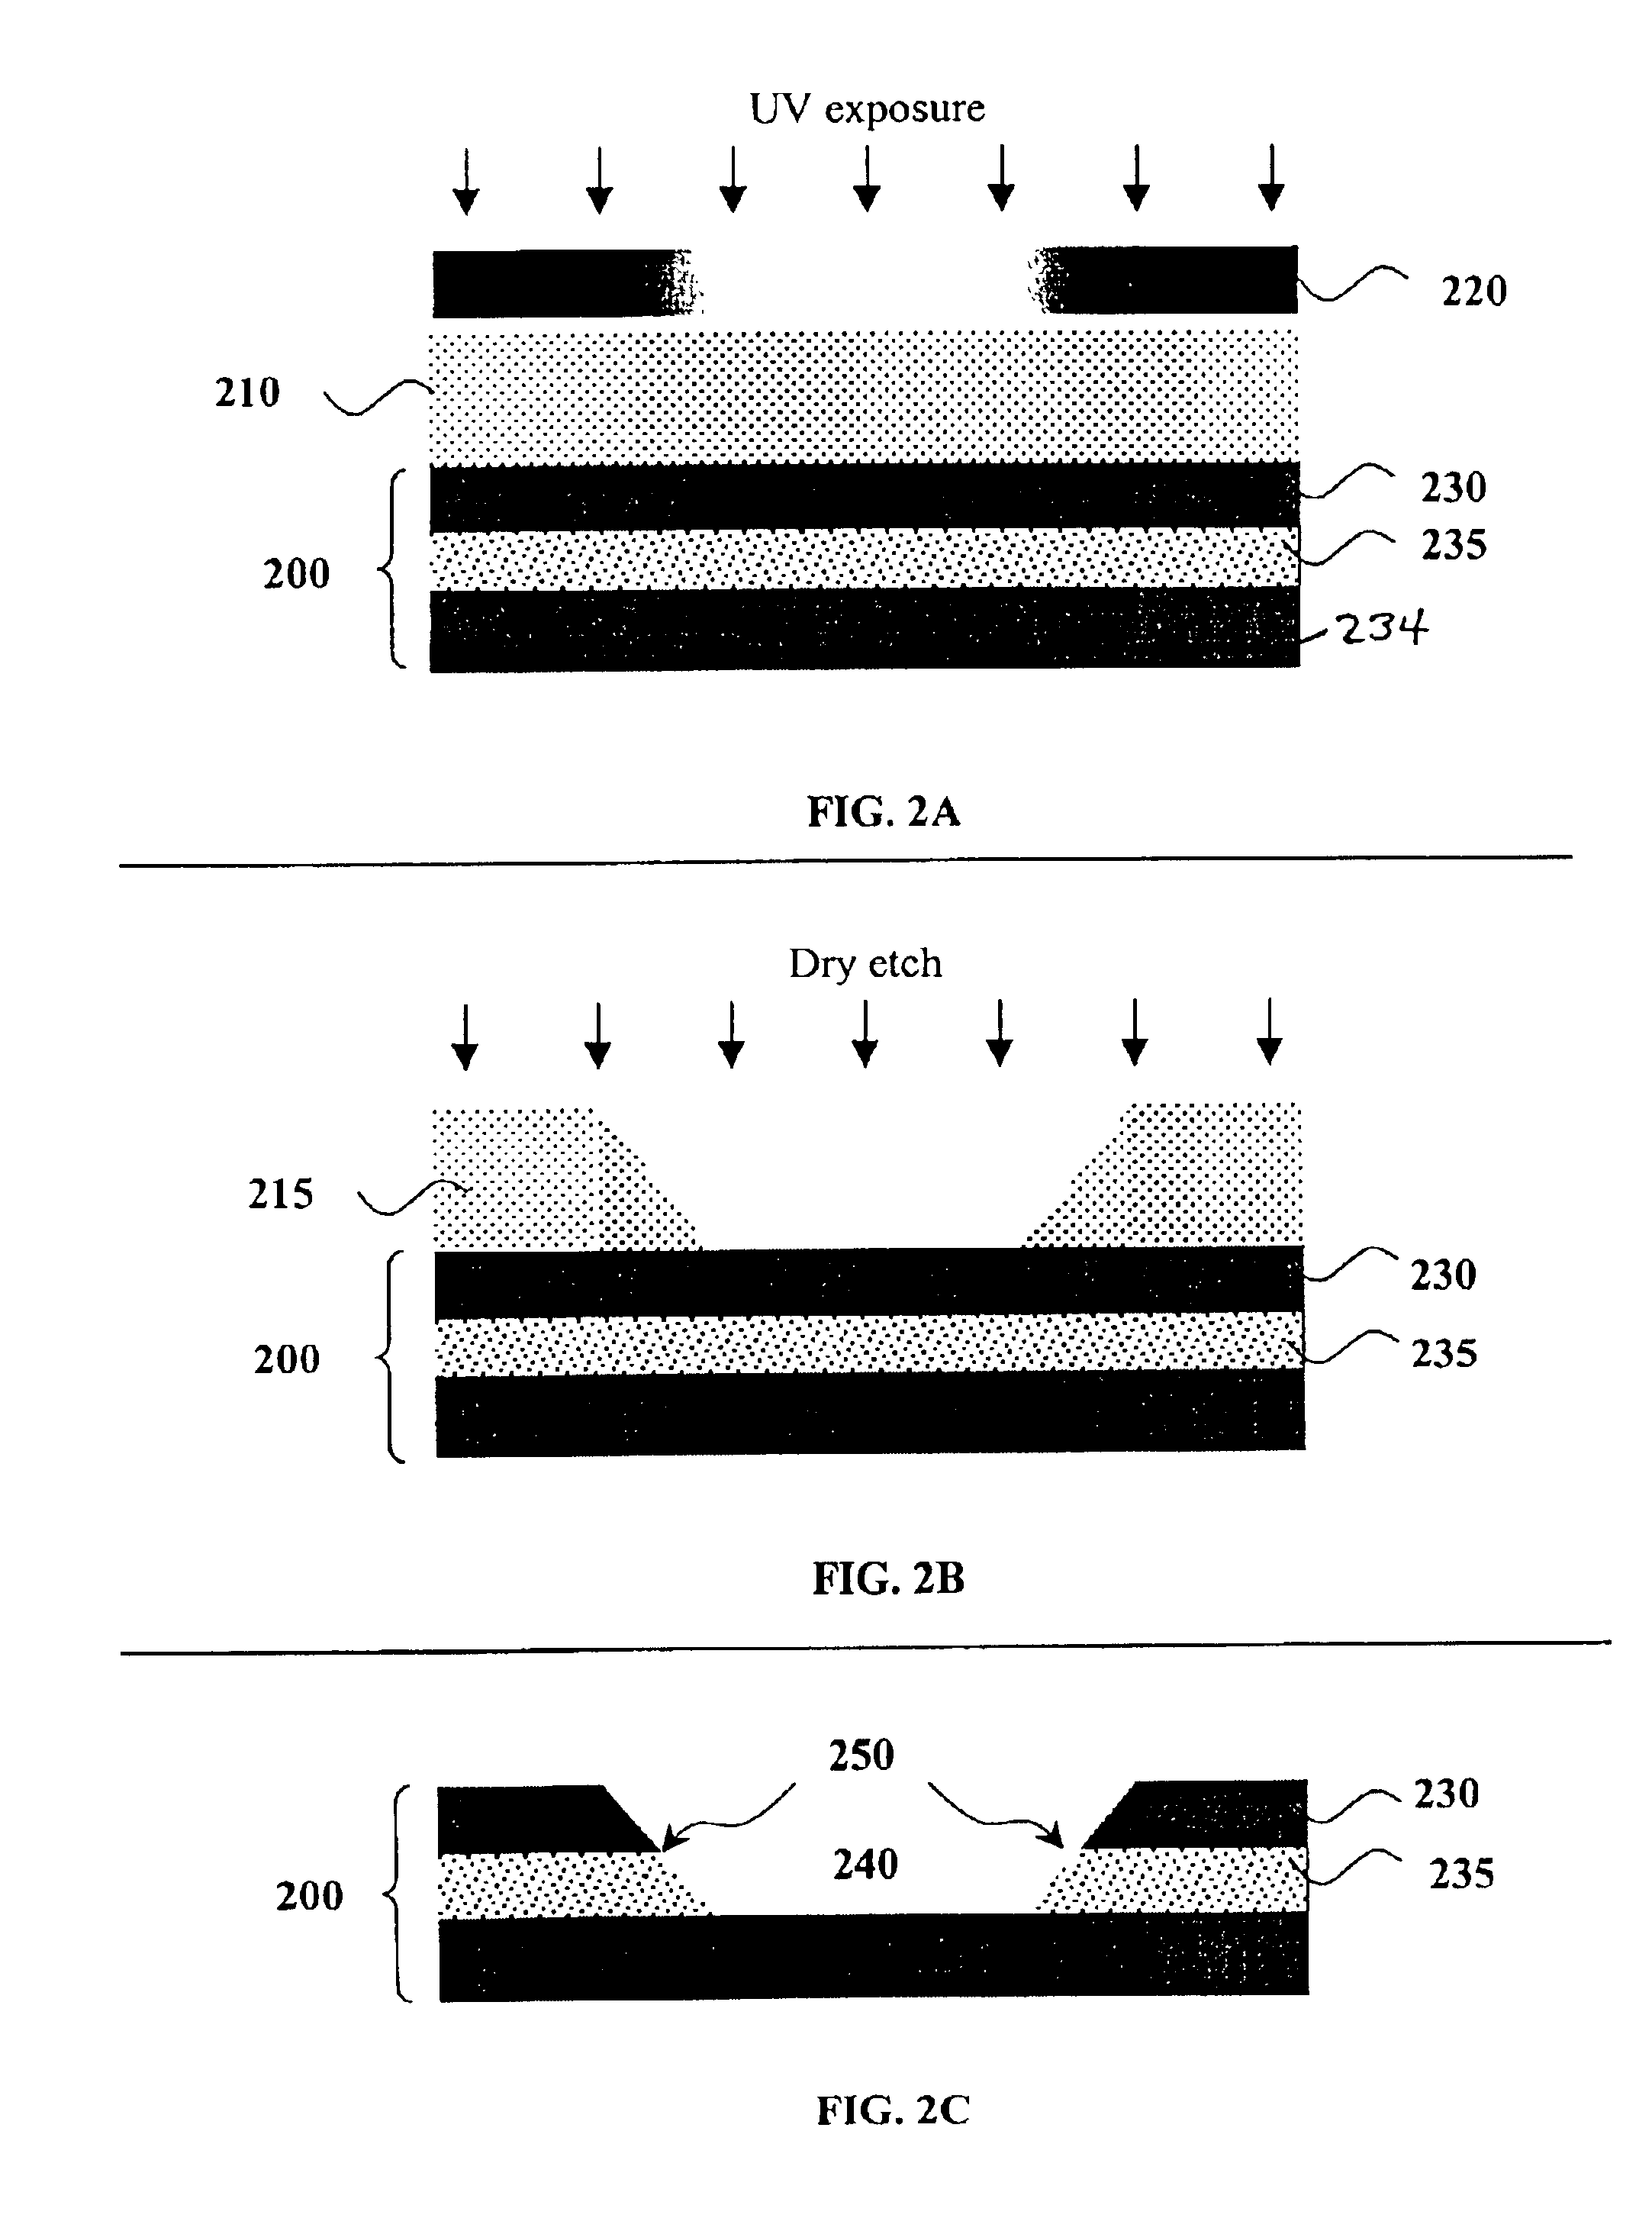 Photonic chip mounting in a recess for waveguide alignment and connection